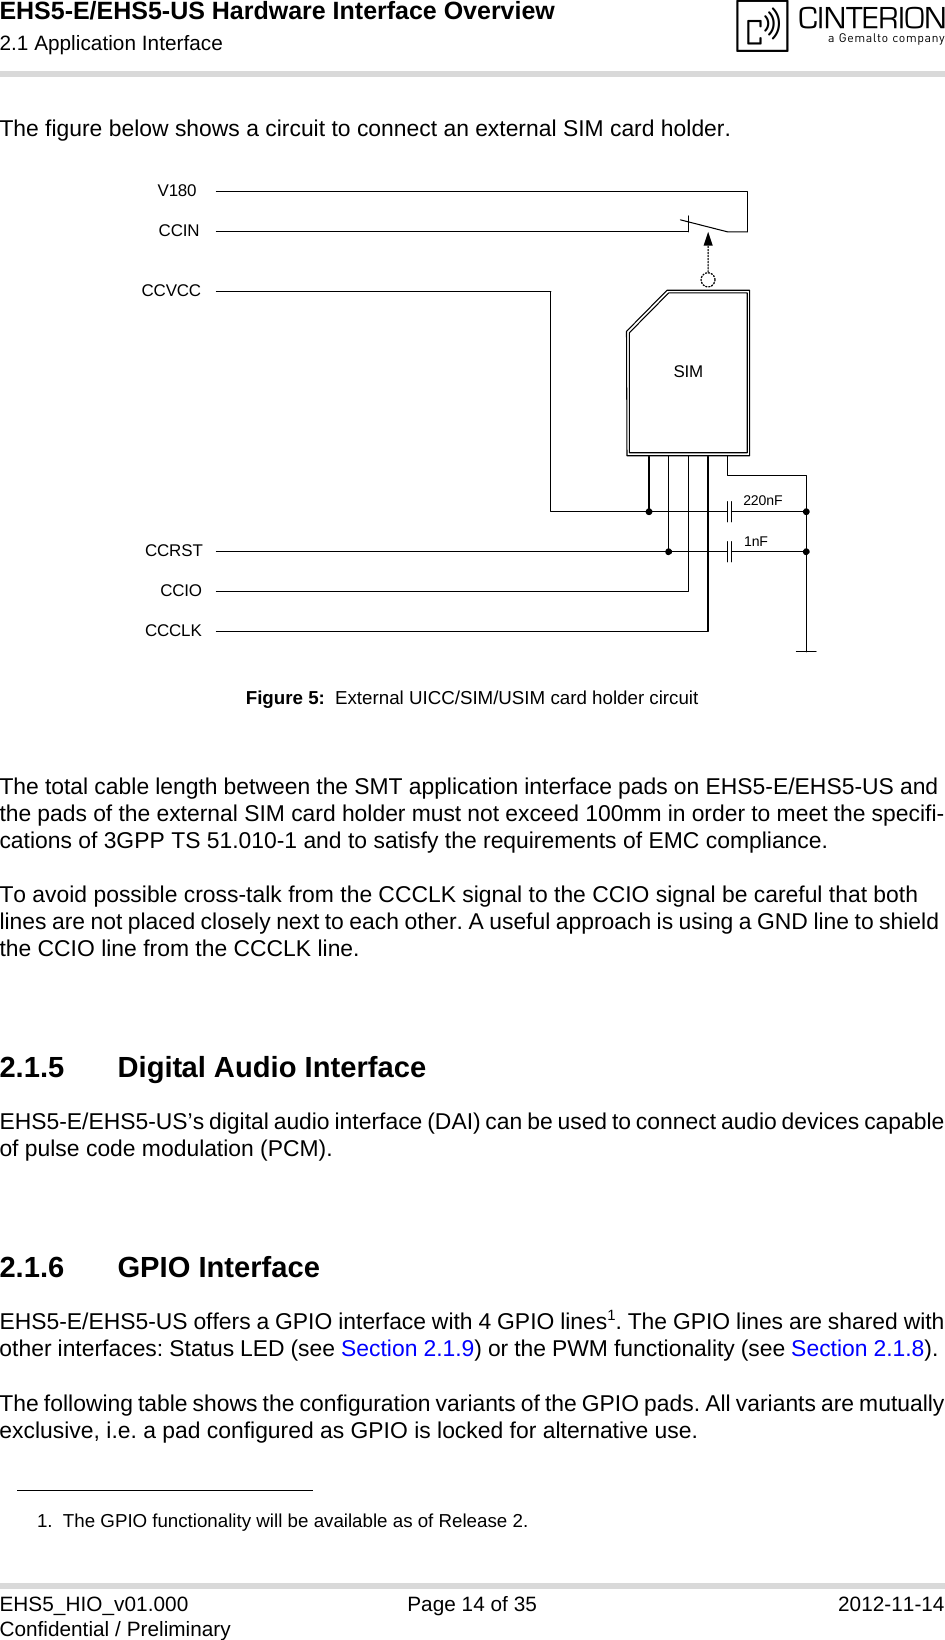 EHS5-E/EHS5-US Hardware Interface Overview2.1 Application Interface18EHS5_HIO_v01.000 Page 14 of 35 2012-11-14Confidential / PreliminaryThe figure below shows a circuit to connect an external SIM card holder.Figure 5:  External UICC/SIM/USIM card holder circuitThe total cable length between the SMT application interface pads on EHS5-E/EHS5-US and the pads of the external SIM card holder must not exceed 100mm in order to meet the specifi-cations of 3GPP TS 51.010-1 and to satisfy the requirements of EMC compliance.To avoid possible cross-talk from the CCCLK signal to the CCIO signal be careful that both lines are not placed closely next to each other. A useful approach is using a GND line to shield the CCIO line from the CCCLK line.2.1.5 Digital Audio InterfaceEHS5-E/EHS5-US’s digital audio interface (DAI) can be used to connect audio devices capableof pulse code modulation (PCM). 2.1.6 GPIO InterfaceEHS5-E/EHS5-US offers a GPIO interface with 4 GPIO lines1. The GPIO lines are shared withother interfaces: Status LED (see Section 2.1.9) or the PWM functionality (see Section 2.1.8). The following table shows the configuration variants of the GPIO pads. All variants are mutuallyexclusive, i.e. a pad configured as GPIO is locked for alternative use.1.  The GPIO functionality will be available as of Release 2.SIMCCVCCCCRSTCCIOCCCLK220nF1nFCCINV180